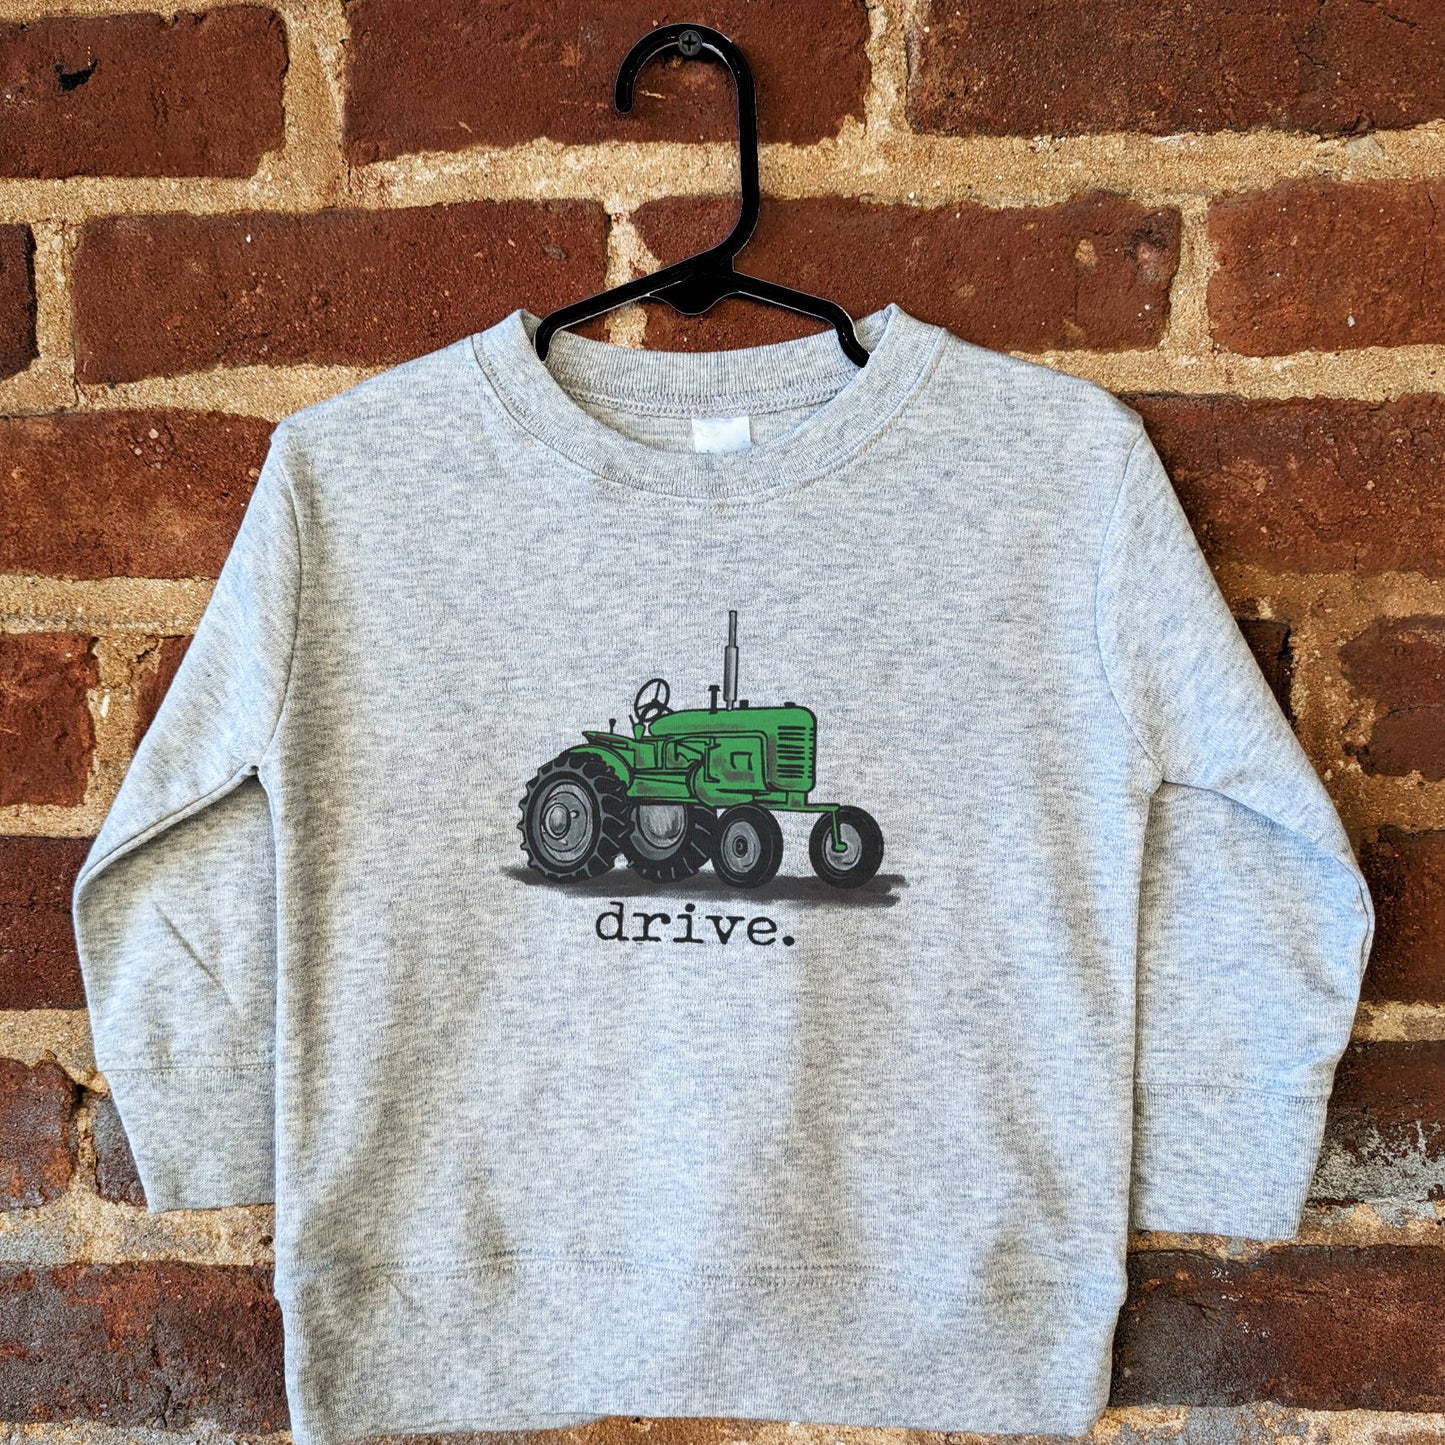 "Drive" Green Tractor Toddler/Youth Long Sleeve Shirt